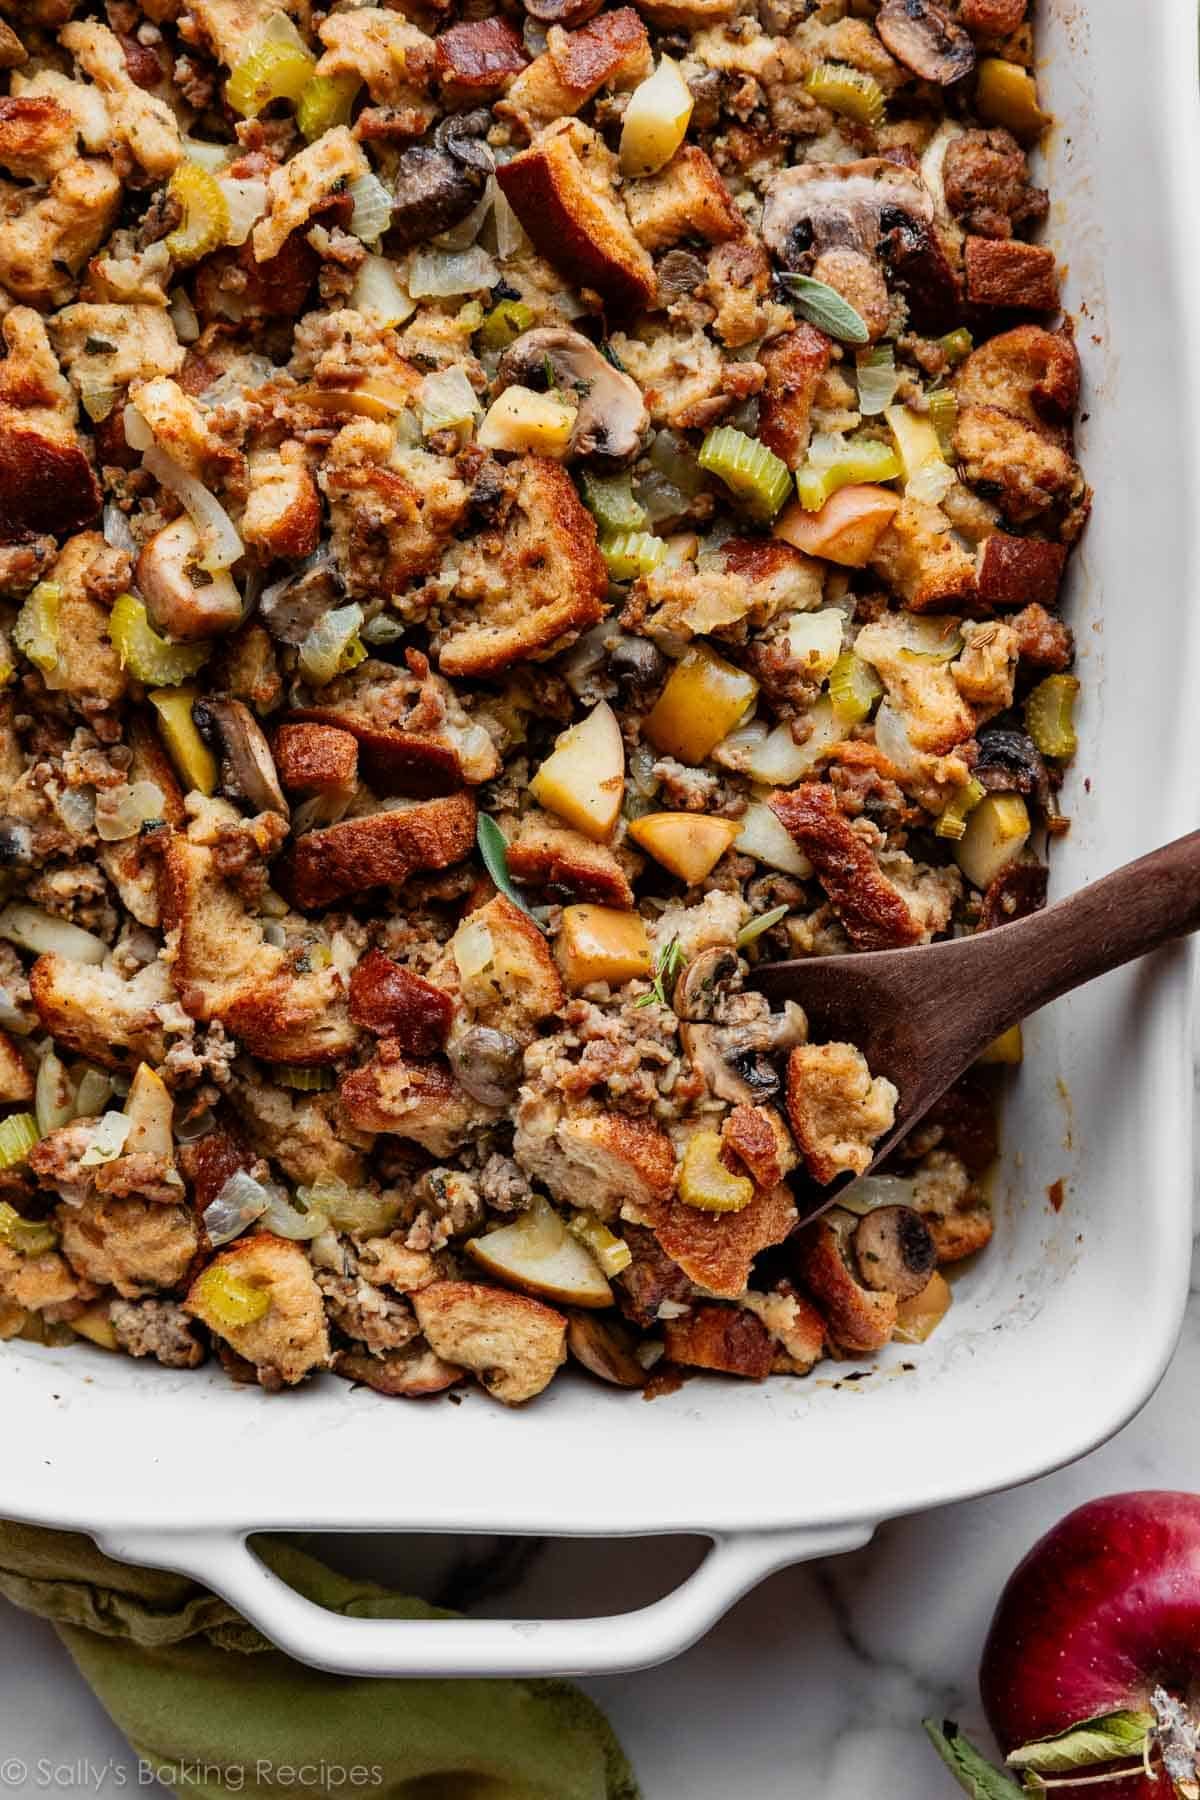 sausage herb Thanksgiving stuffing in a white baking dish with wooden spoon.